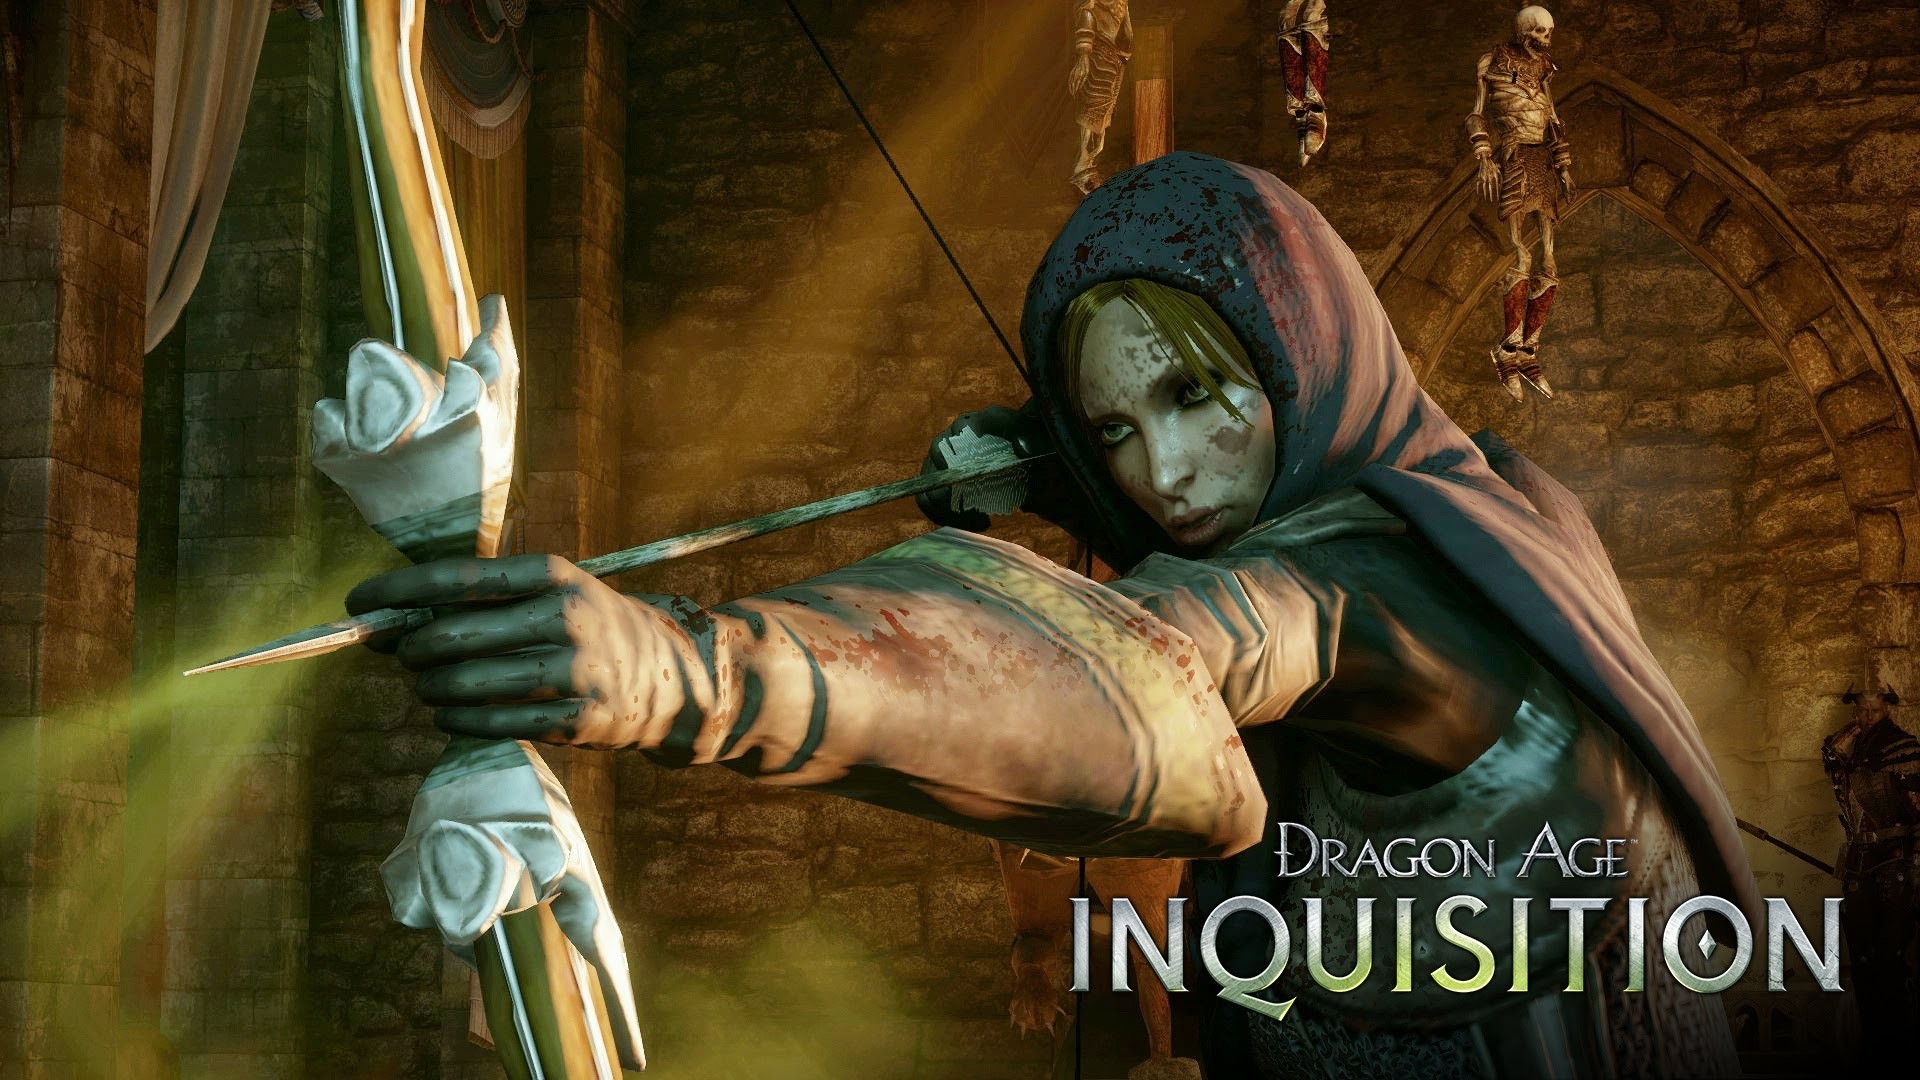 1920x1080 Dragon Age Inquisition Wallpaper For Android 39+ - Page 2 of 3 -  hdwallpaper20.com